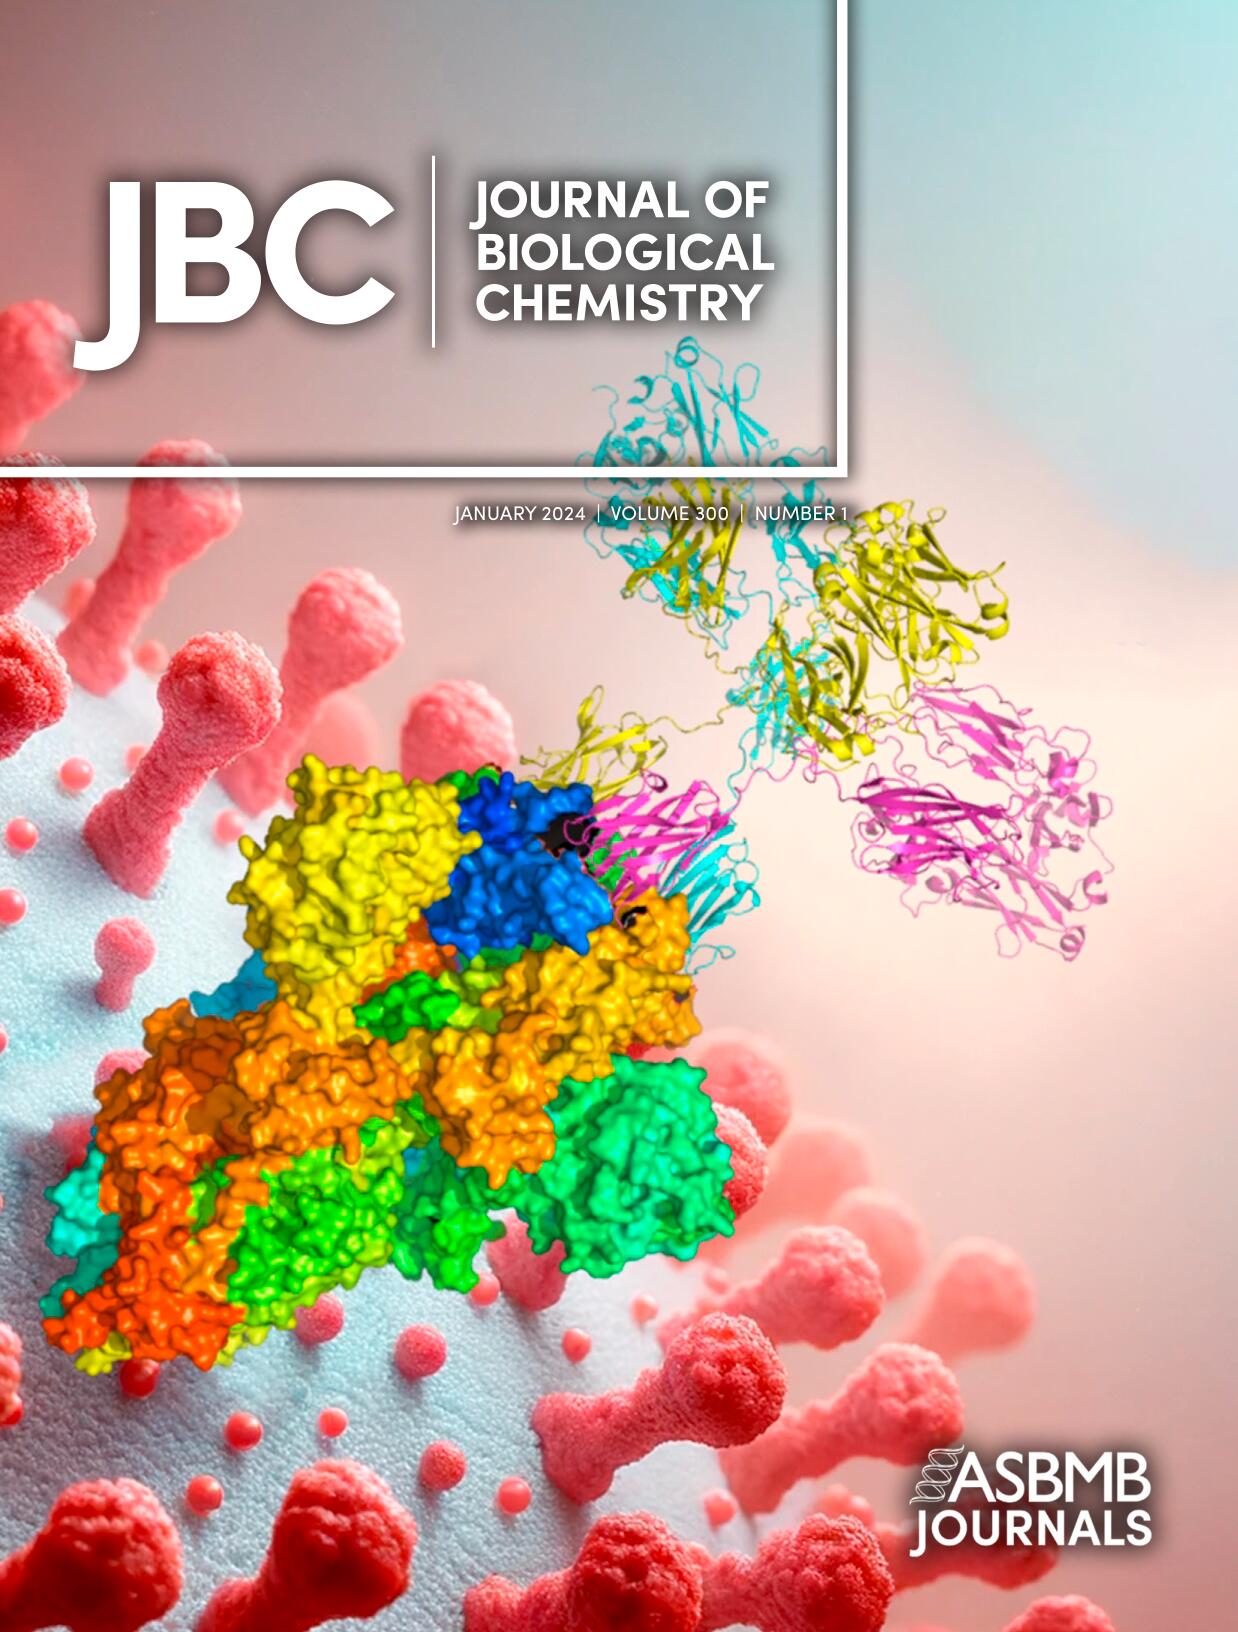 Cover picture from  J. Biol Chem. 299, 105337(2023)